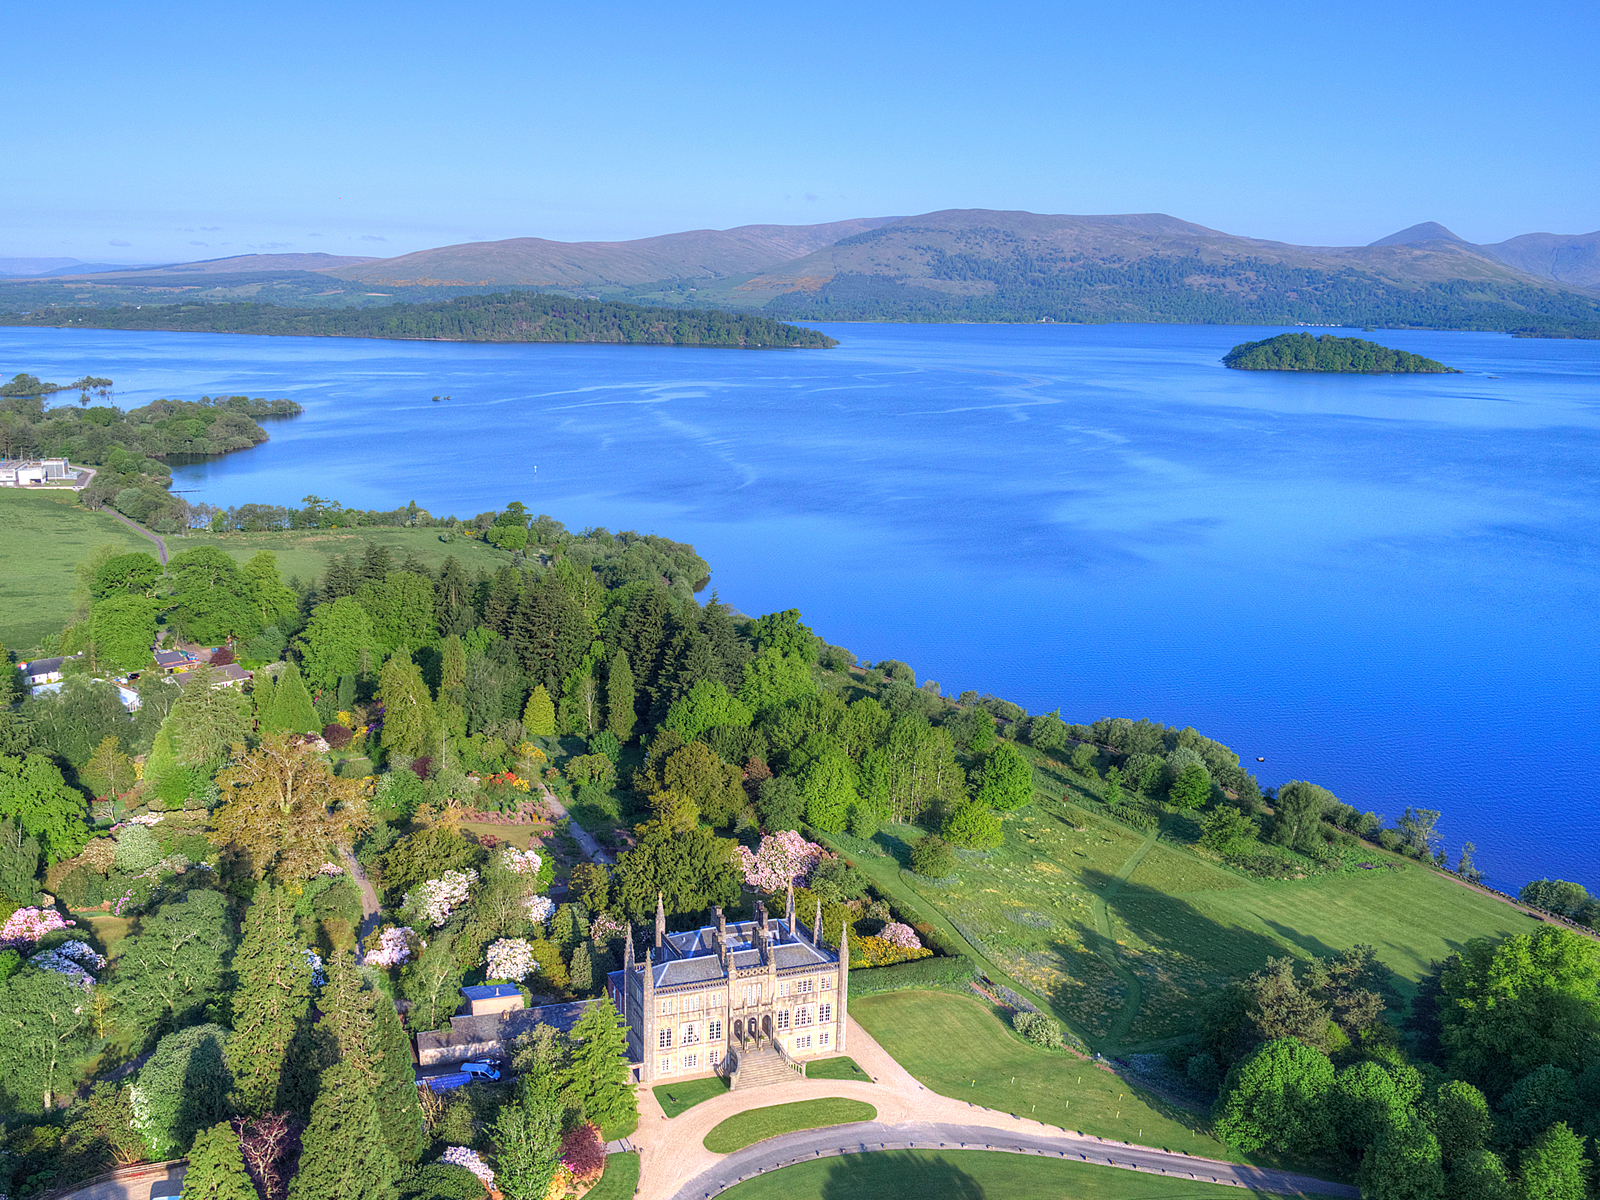 Aerial shot of Ross Priory and estate, with views over Loch Lomond. Image courtesy of Aye in the Sky.